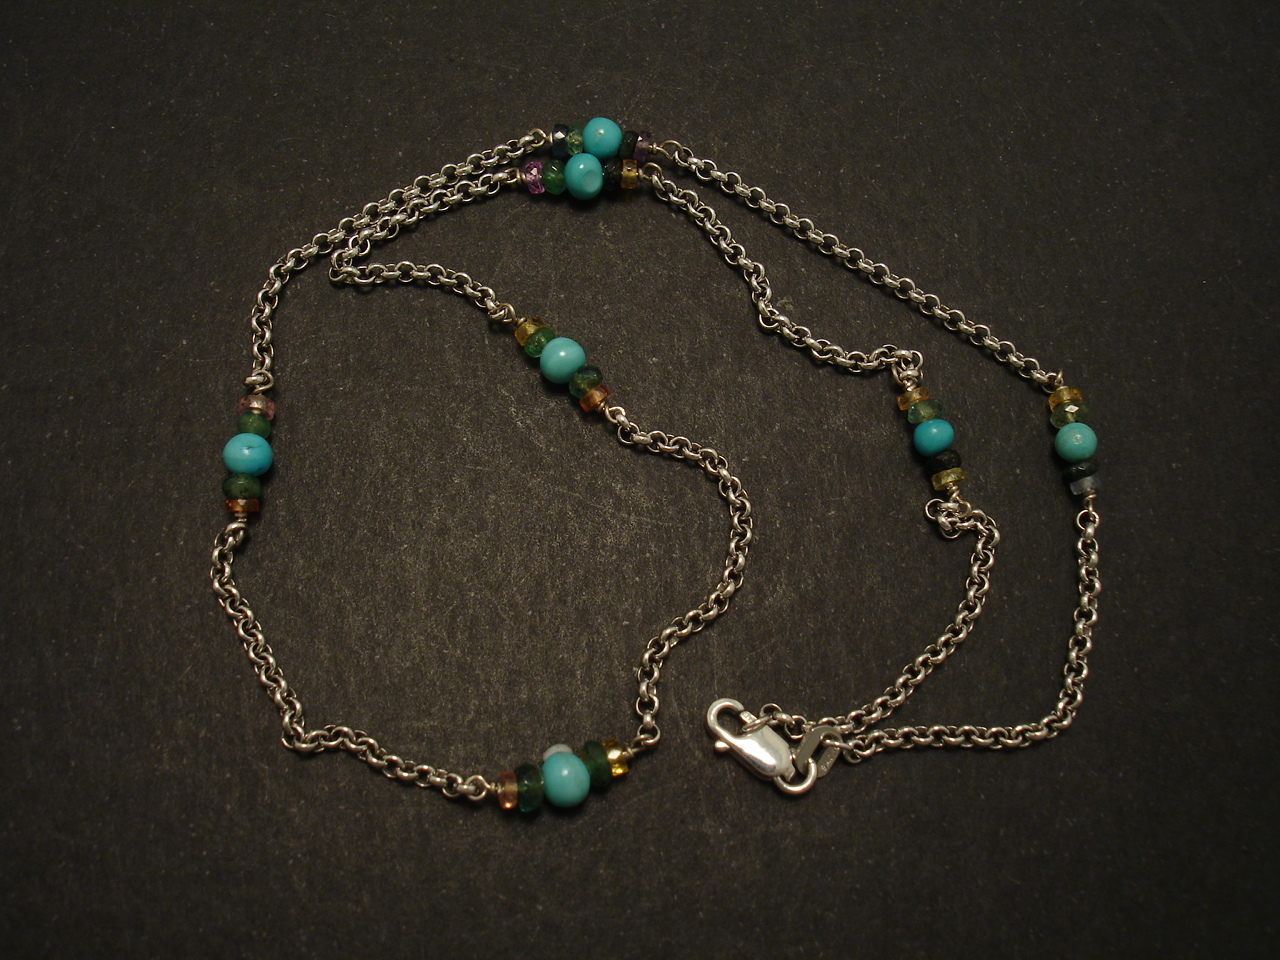 Turquoise Cool Blue, White Gold Chain Necklace - Christopher William Sydney Australia - Antique ...